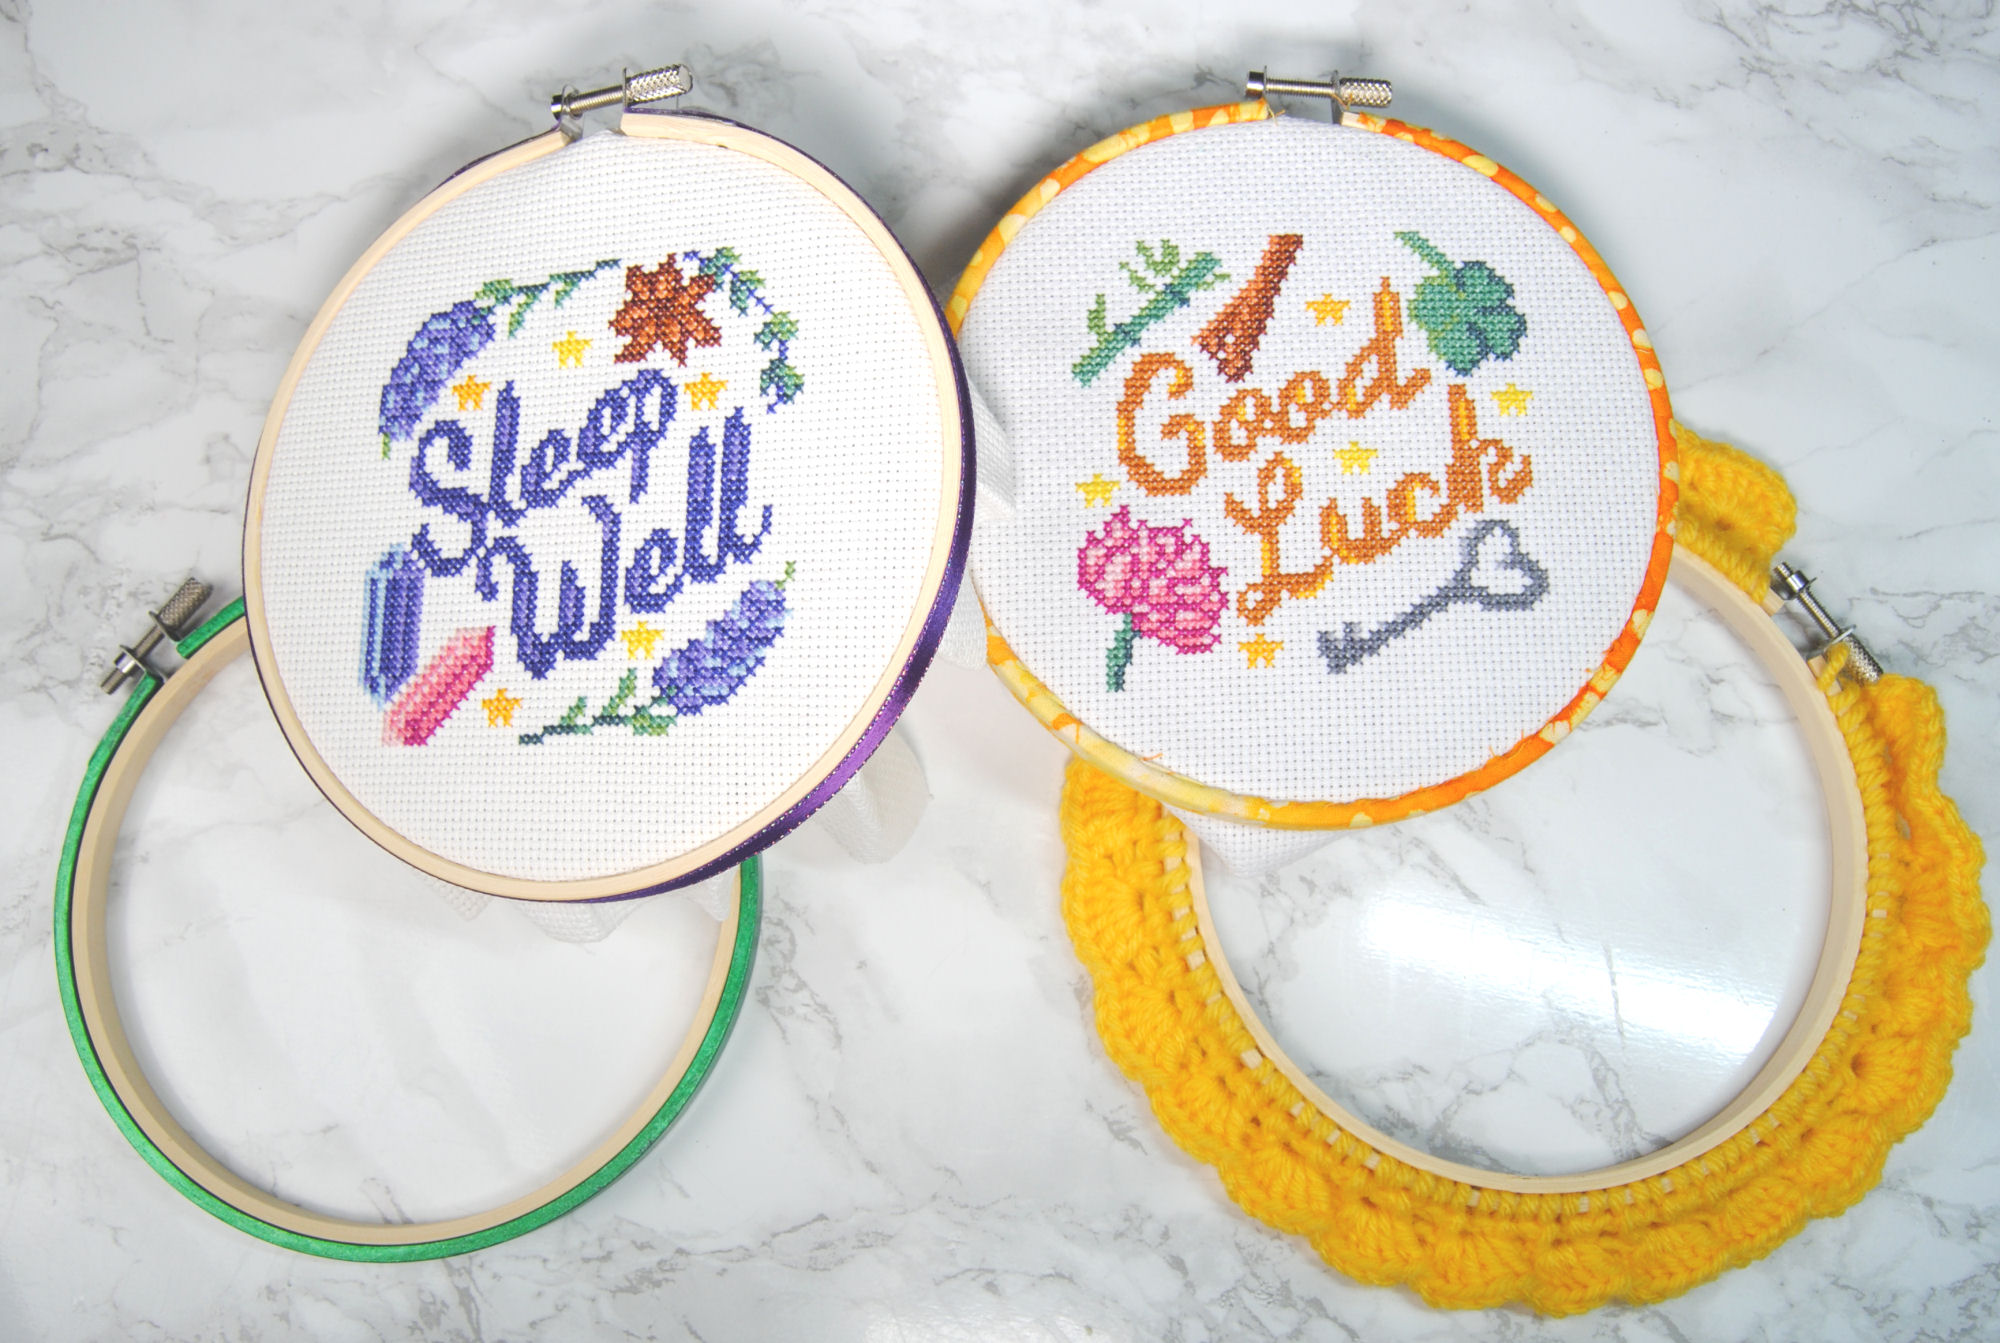 Better Crafts 6 Pieces Embroidery Hoop Wooden Circle Cross Stitch